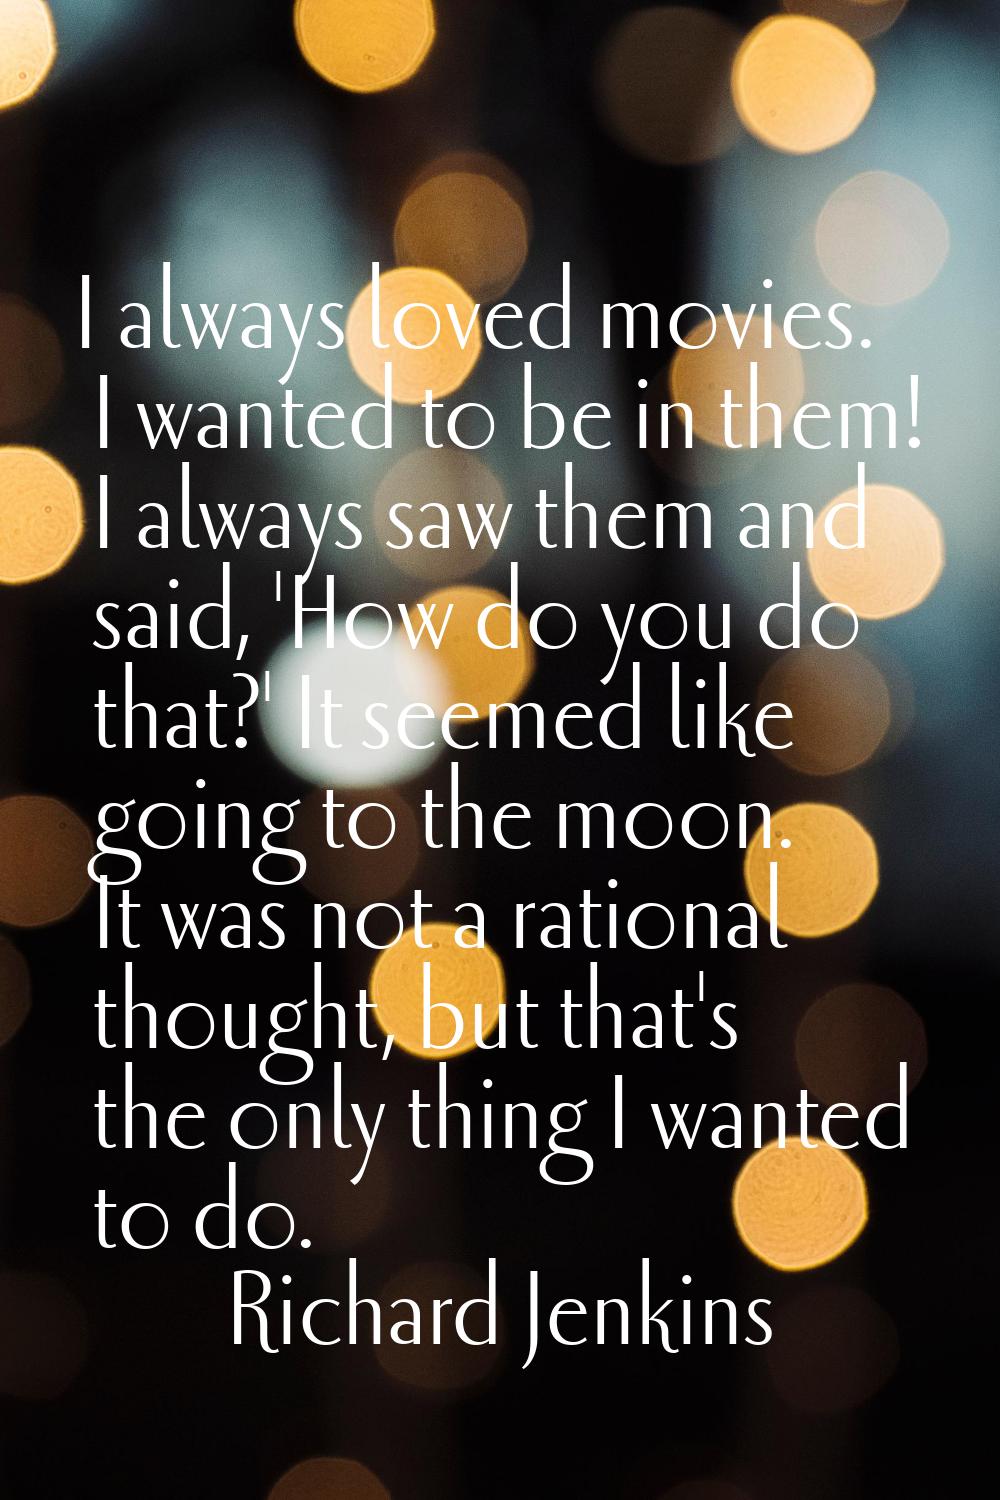 I always loved movies. I wanted to be in them! I always saw them and said, 'How do you do that?' It